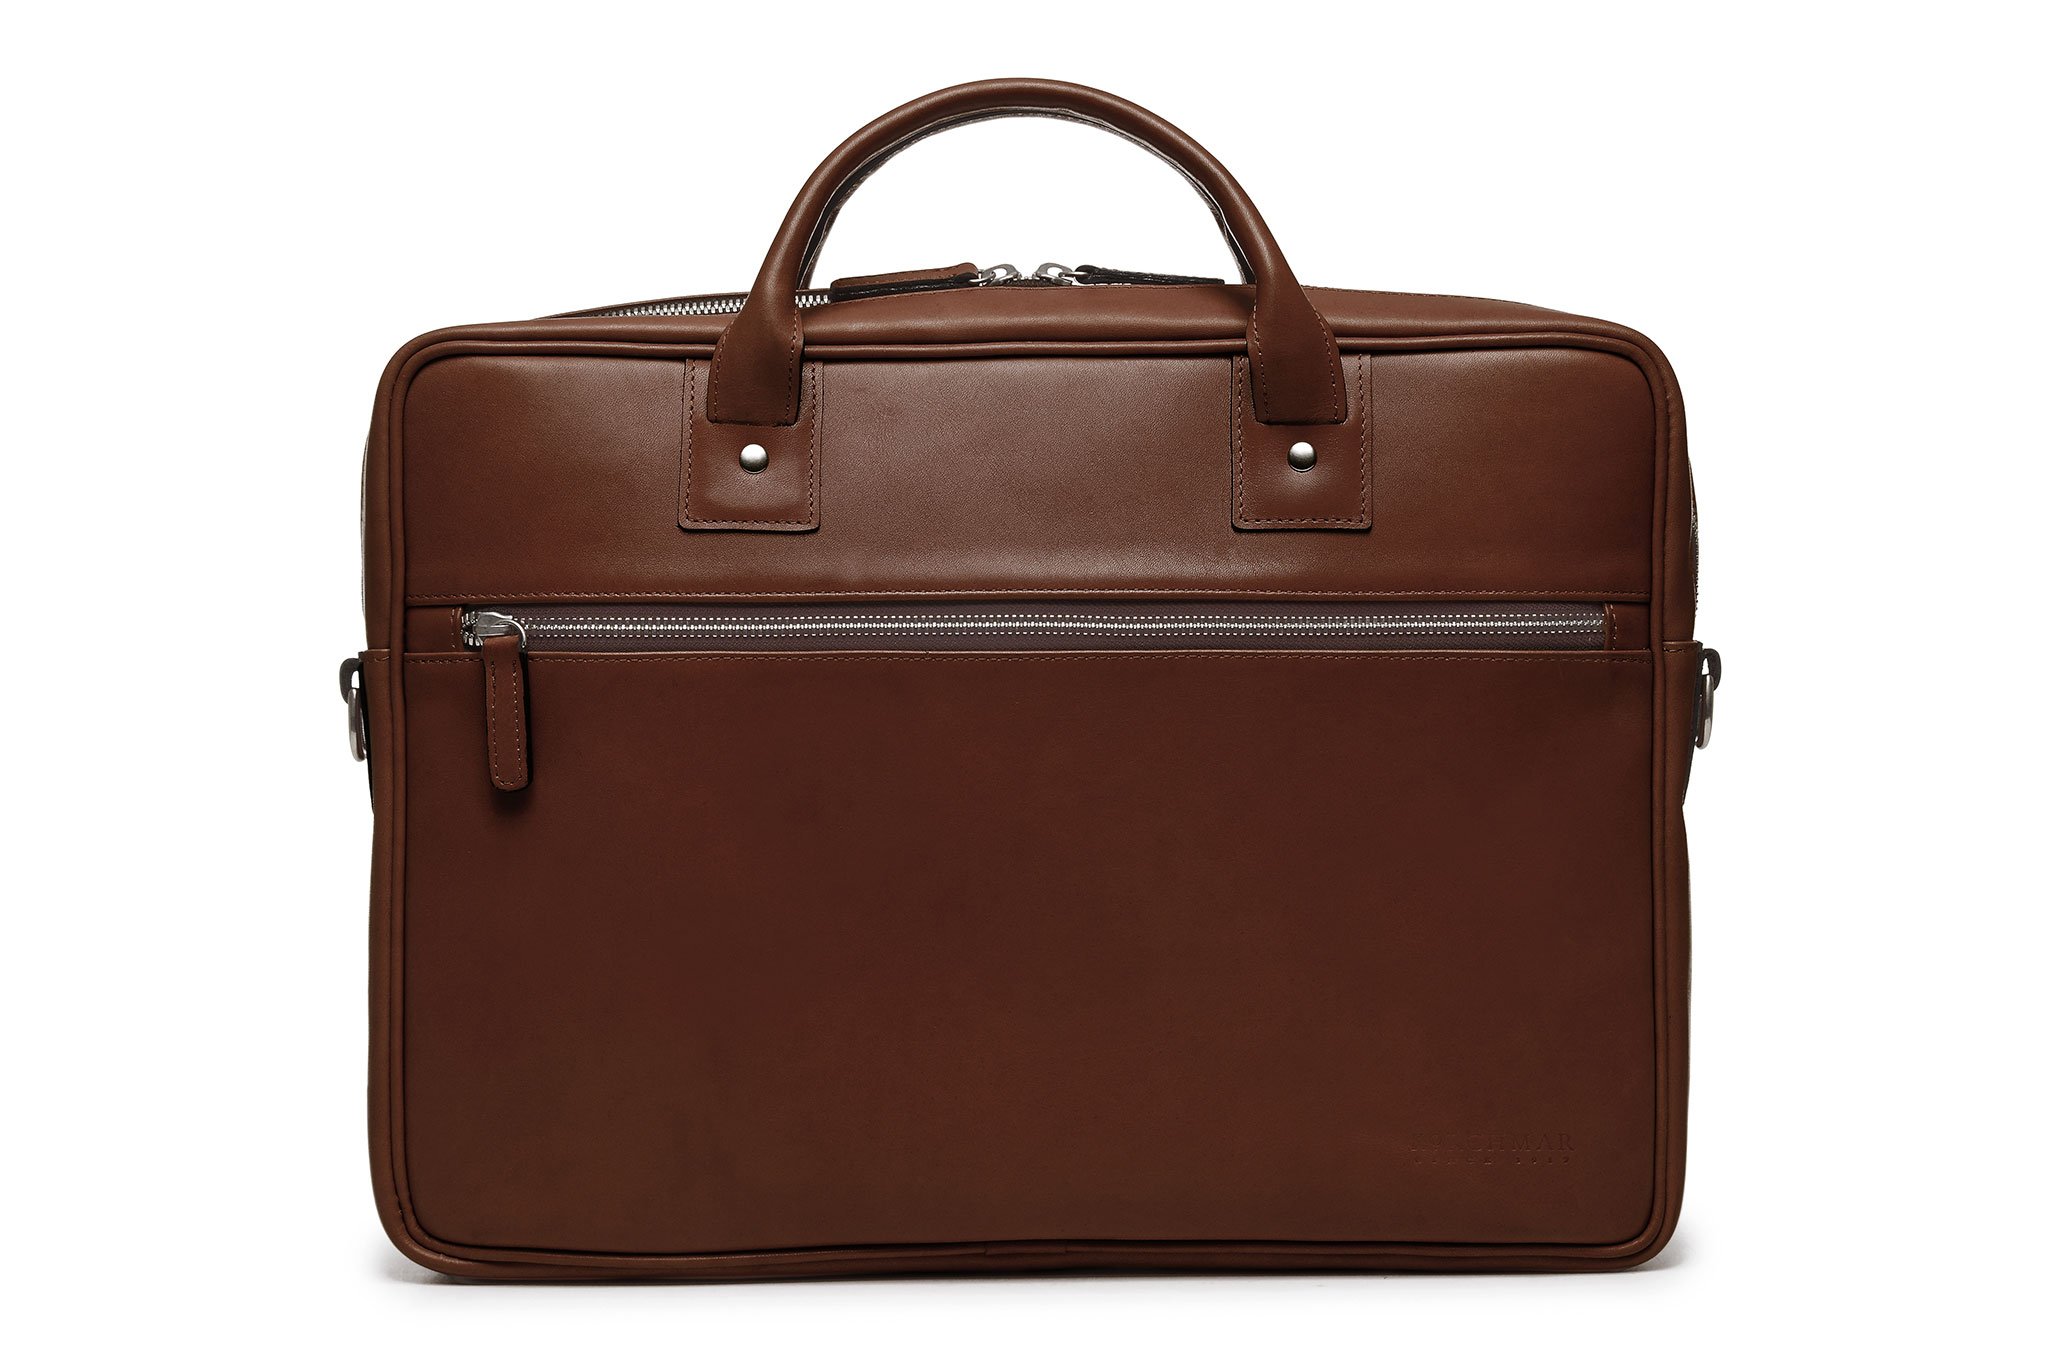 8 Briefcases To Buy Right Now | Men's Style Pro | Men's Style Blog & Shop